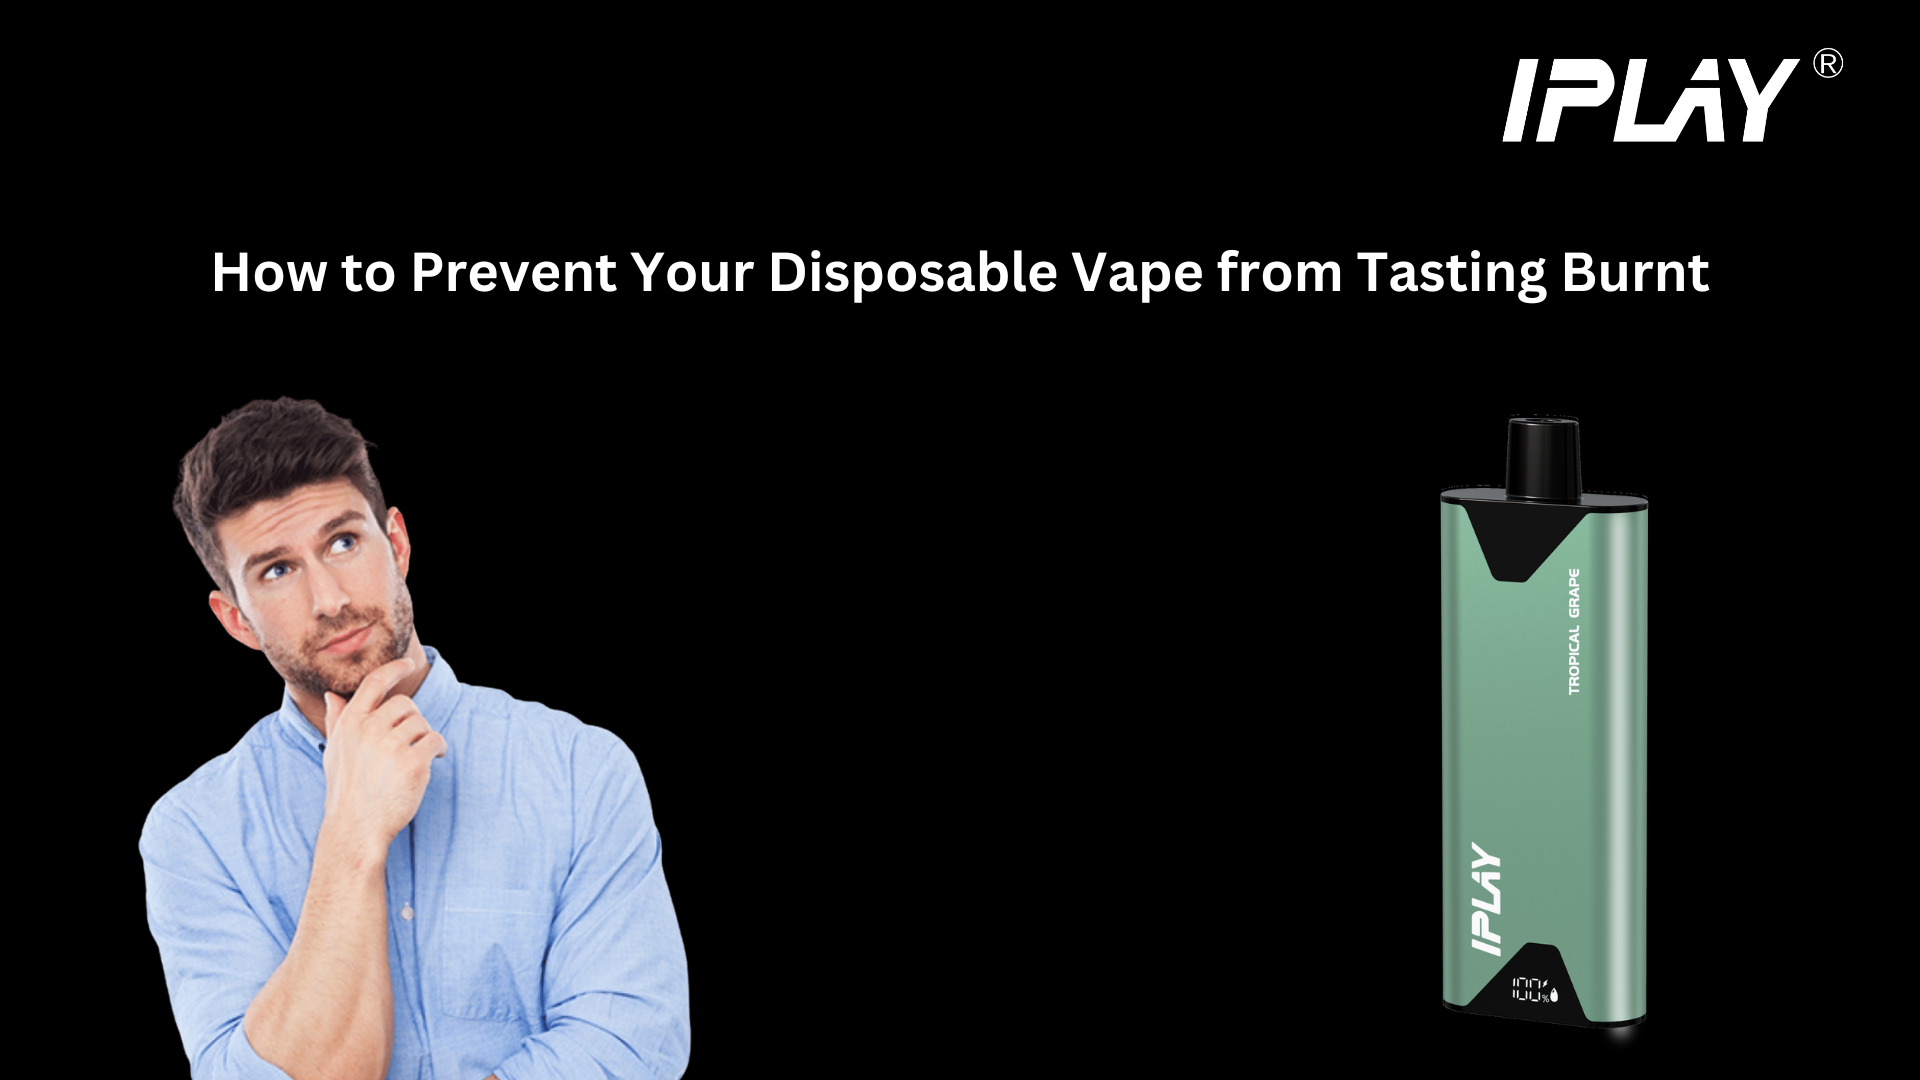 How to Prevent Your Disposable Vape from Tasting Burnt